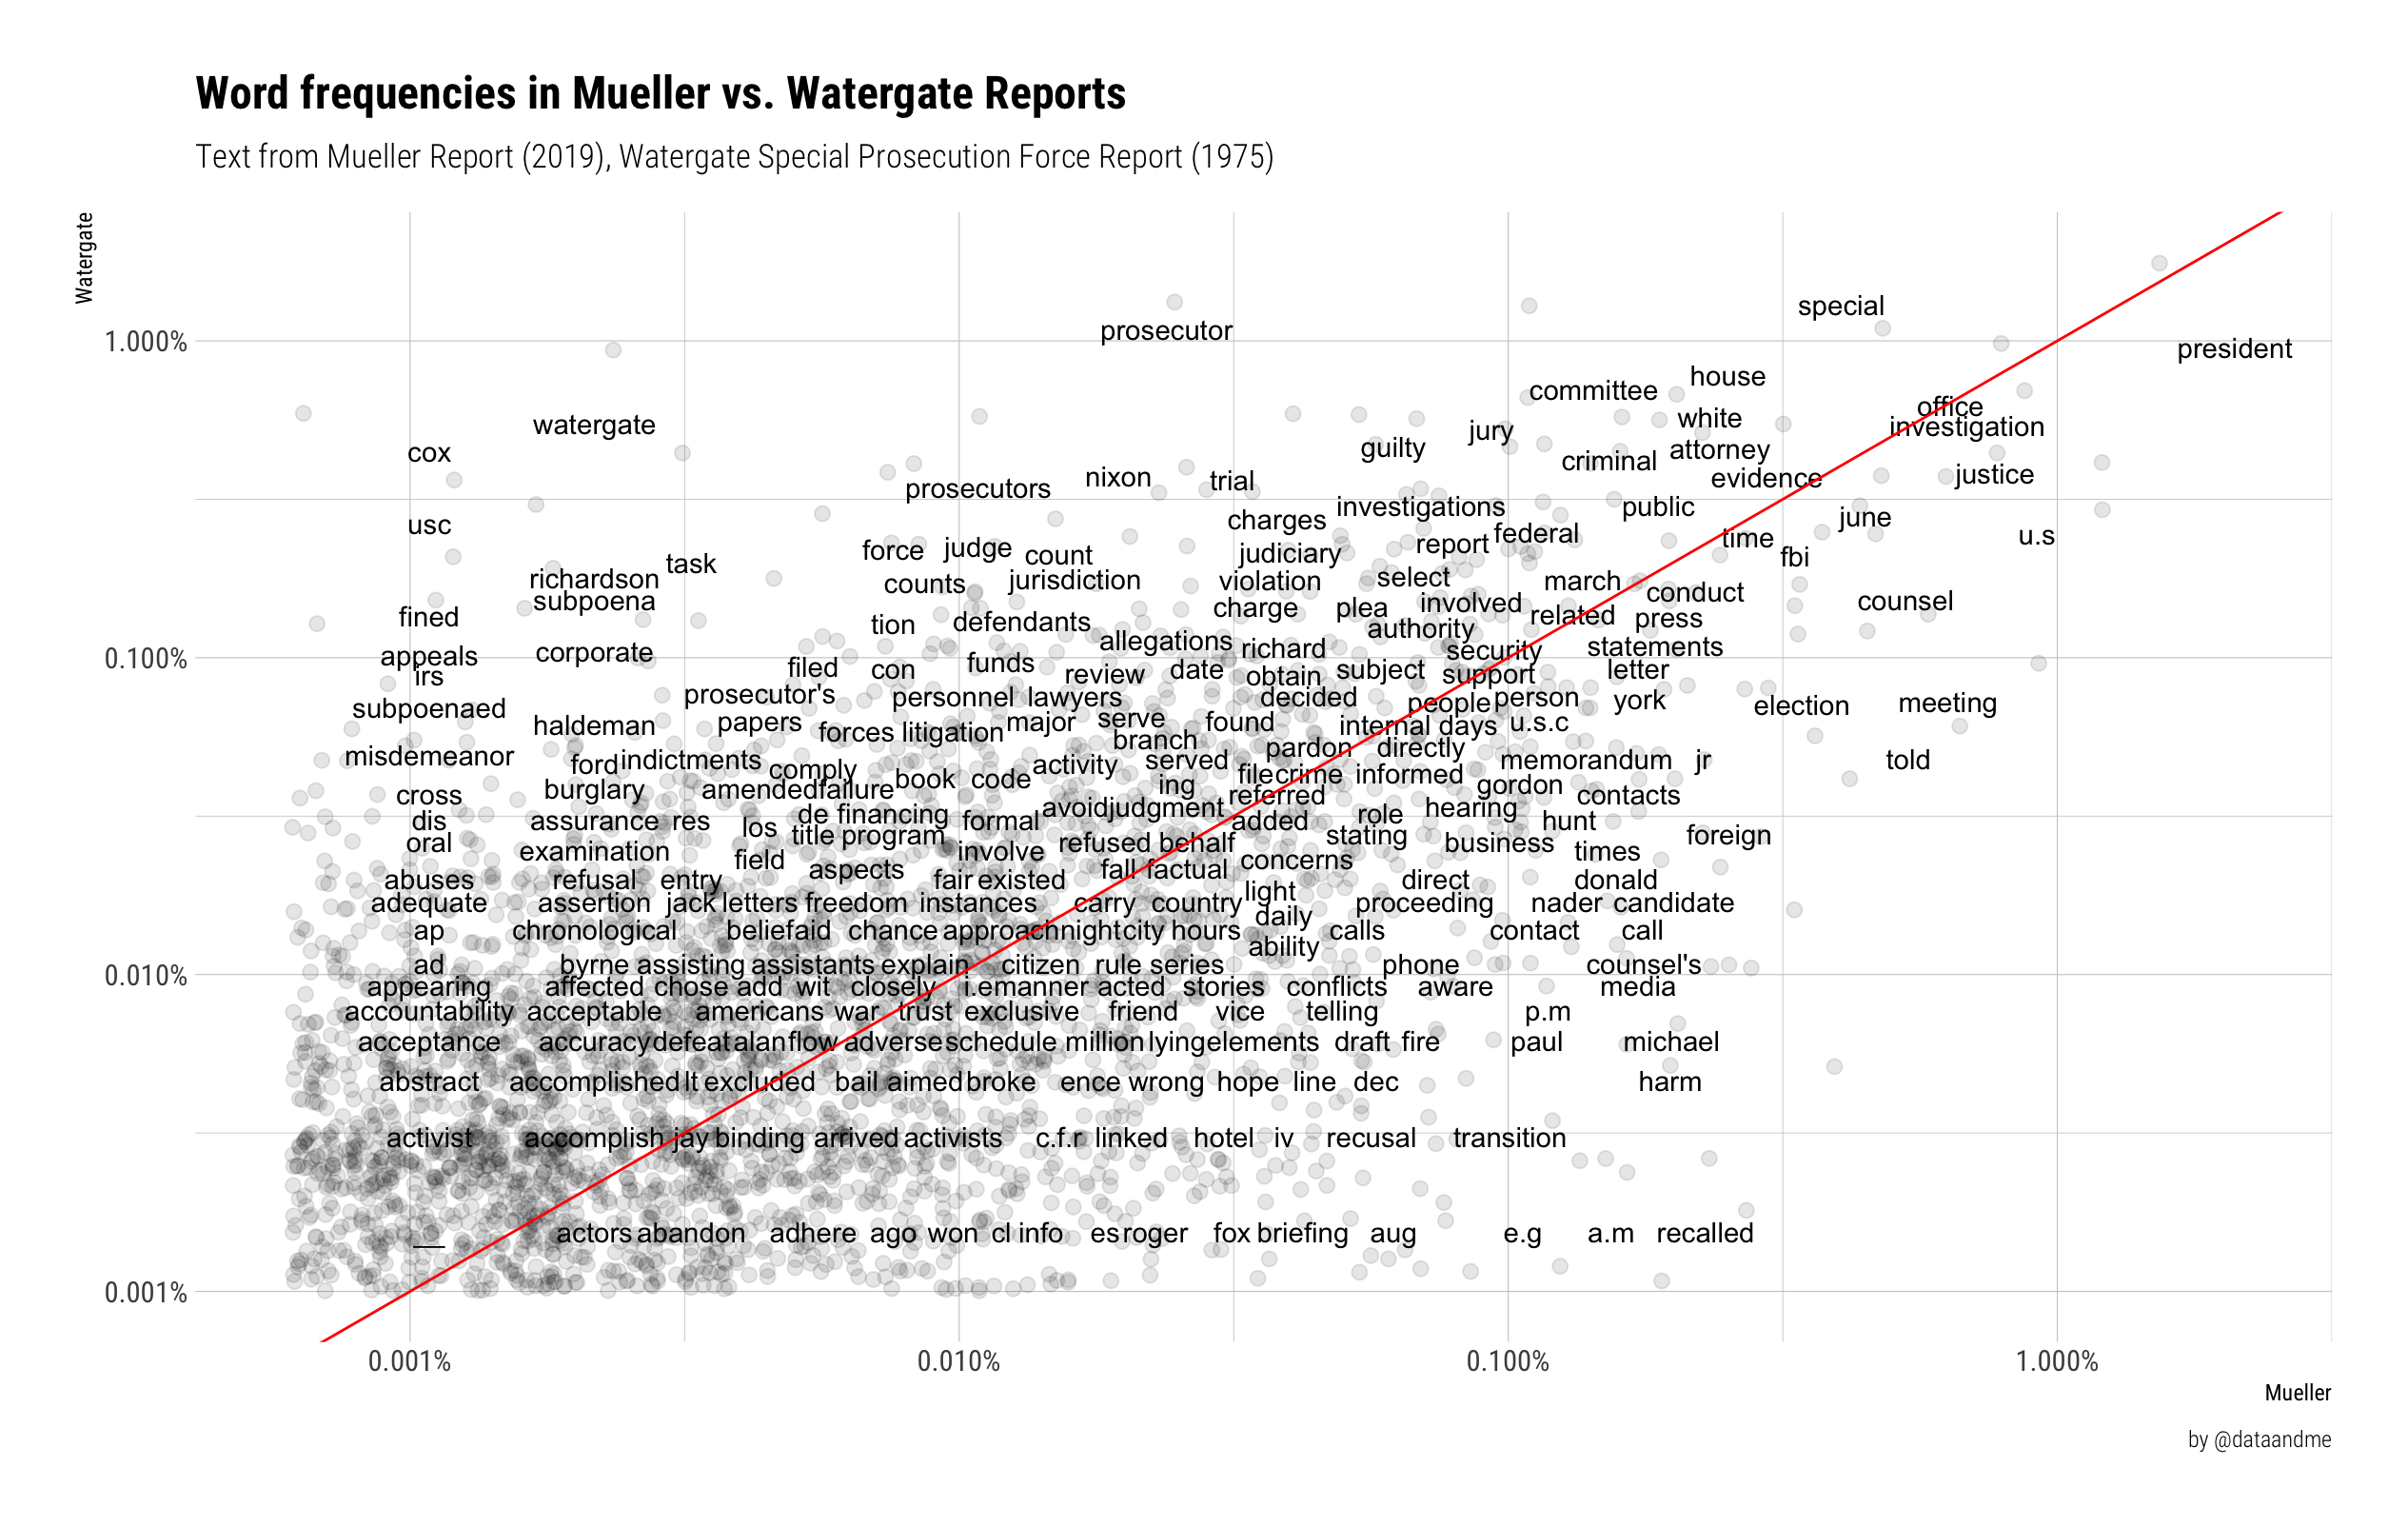 word frequencies in Mueller vs. Watergate Reports